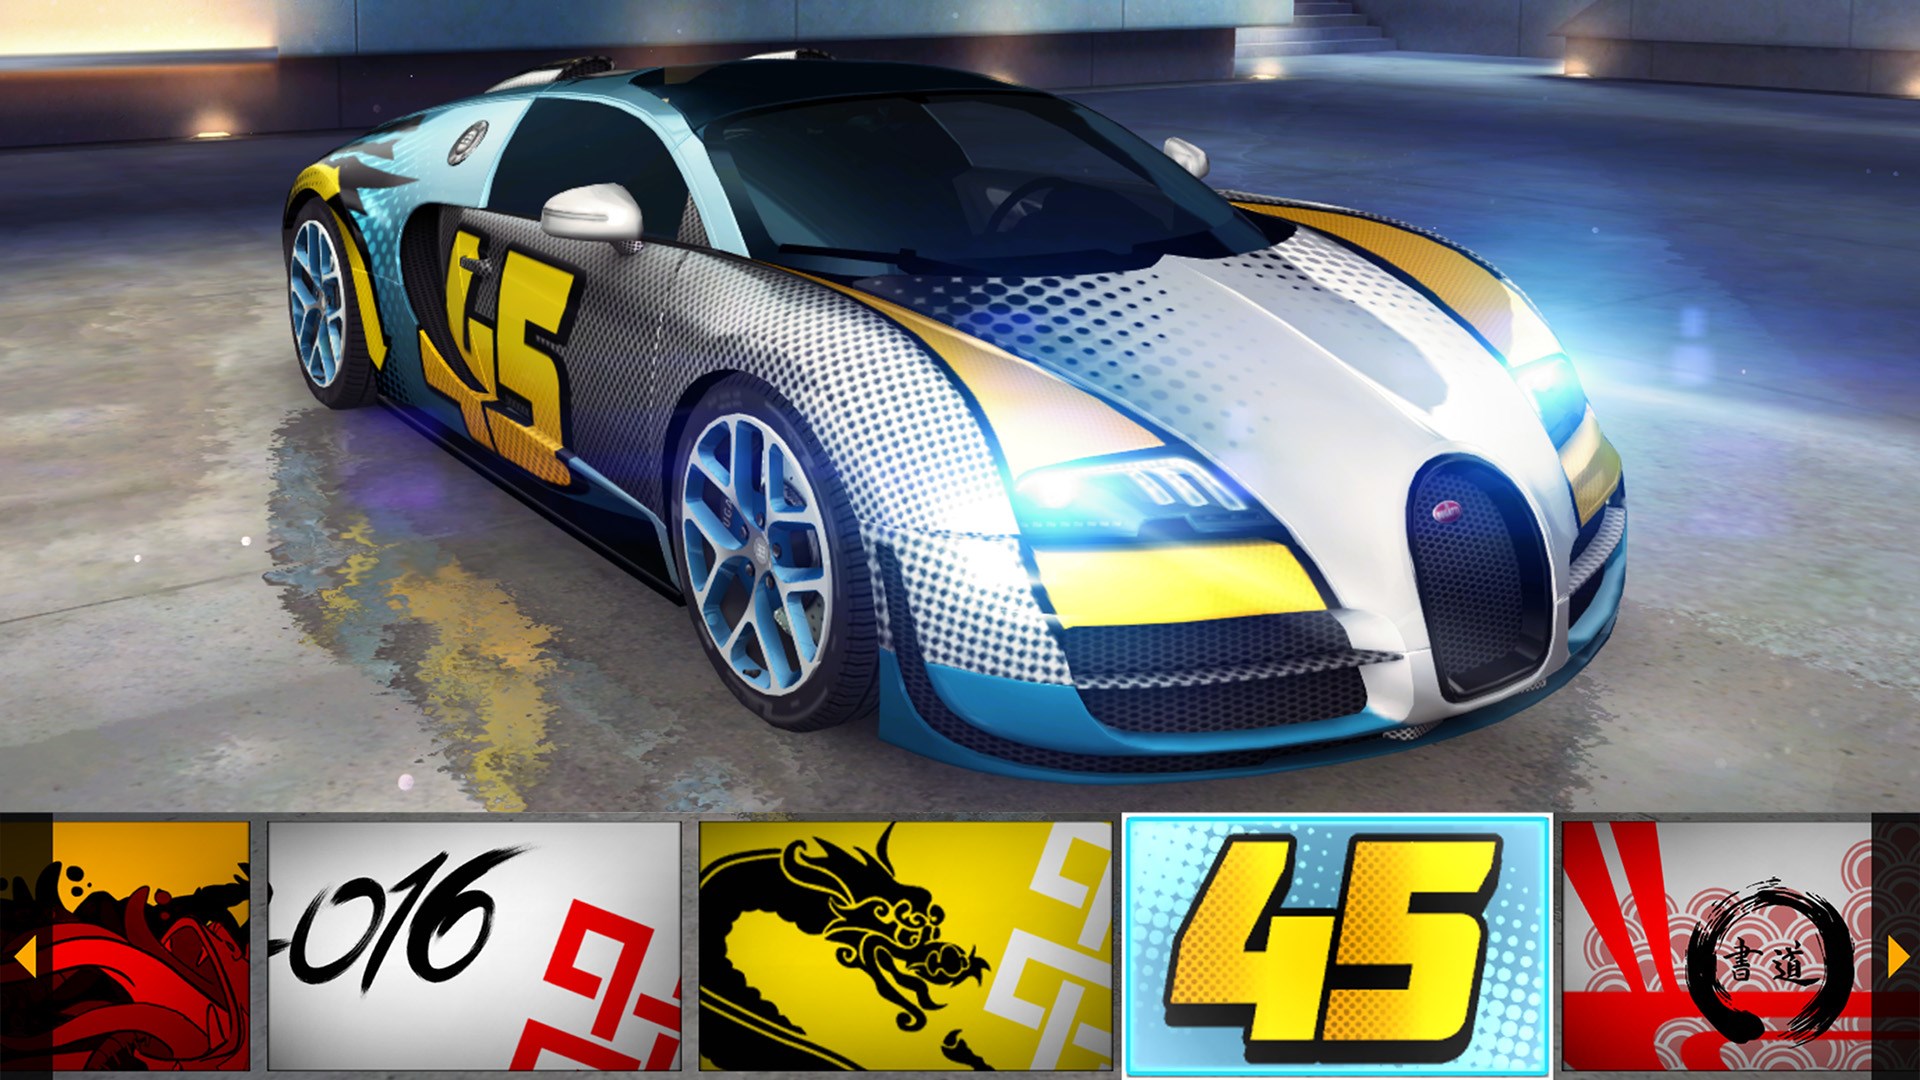 3d car racing games free download for windows 10